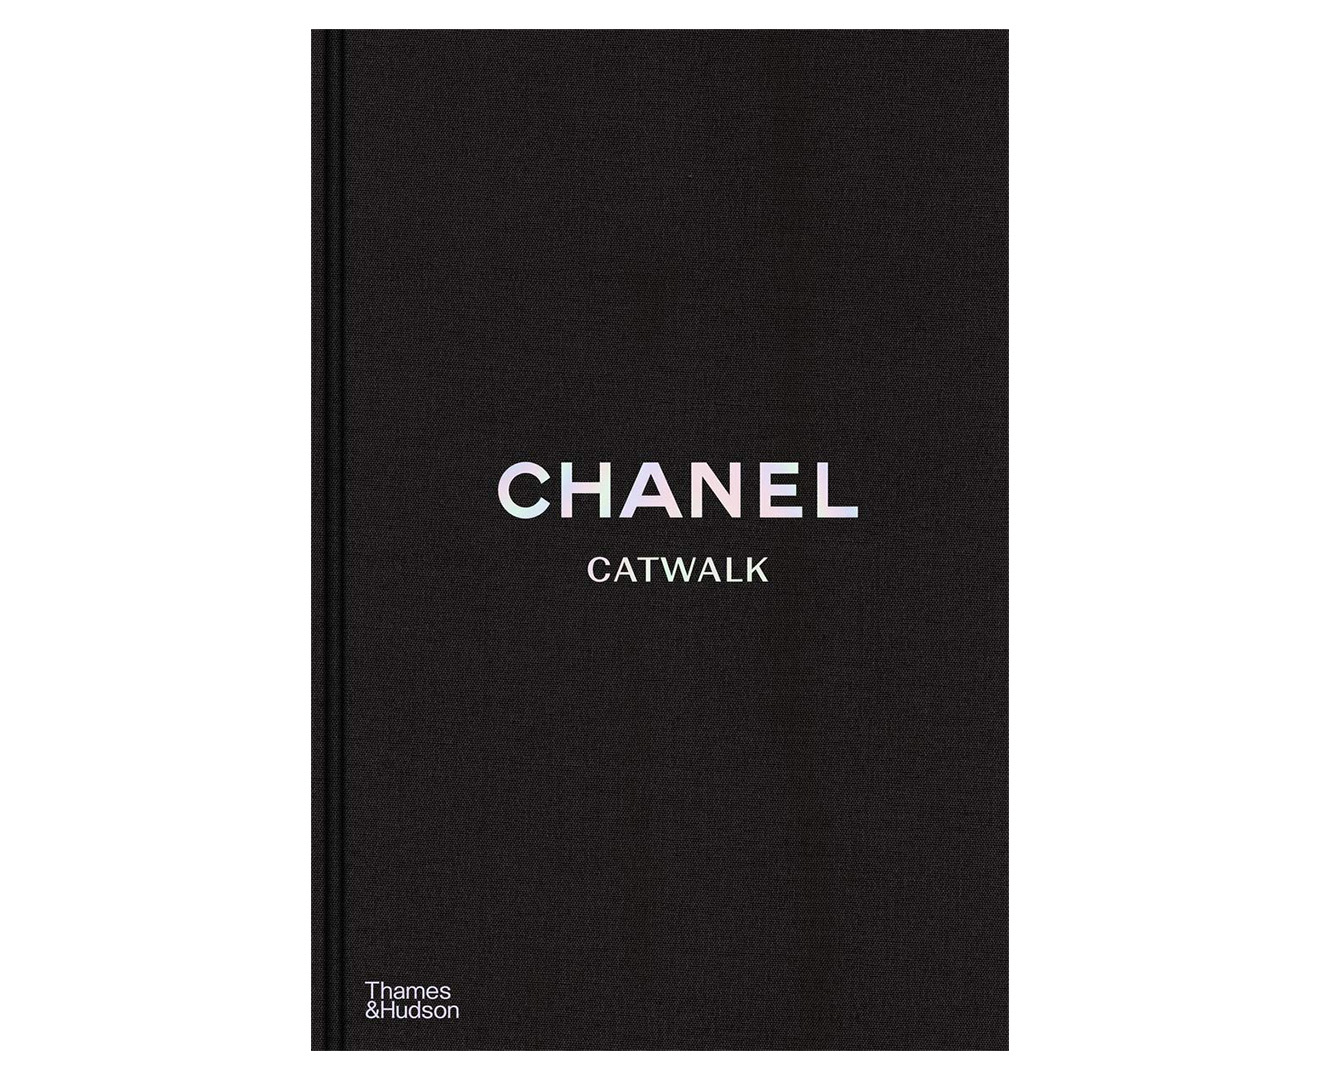 Chanel Catwalk: The Complete Collection Hardcover book by Patrick Mauriés  and Adélia Sabatini 